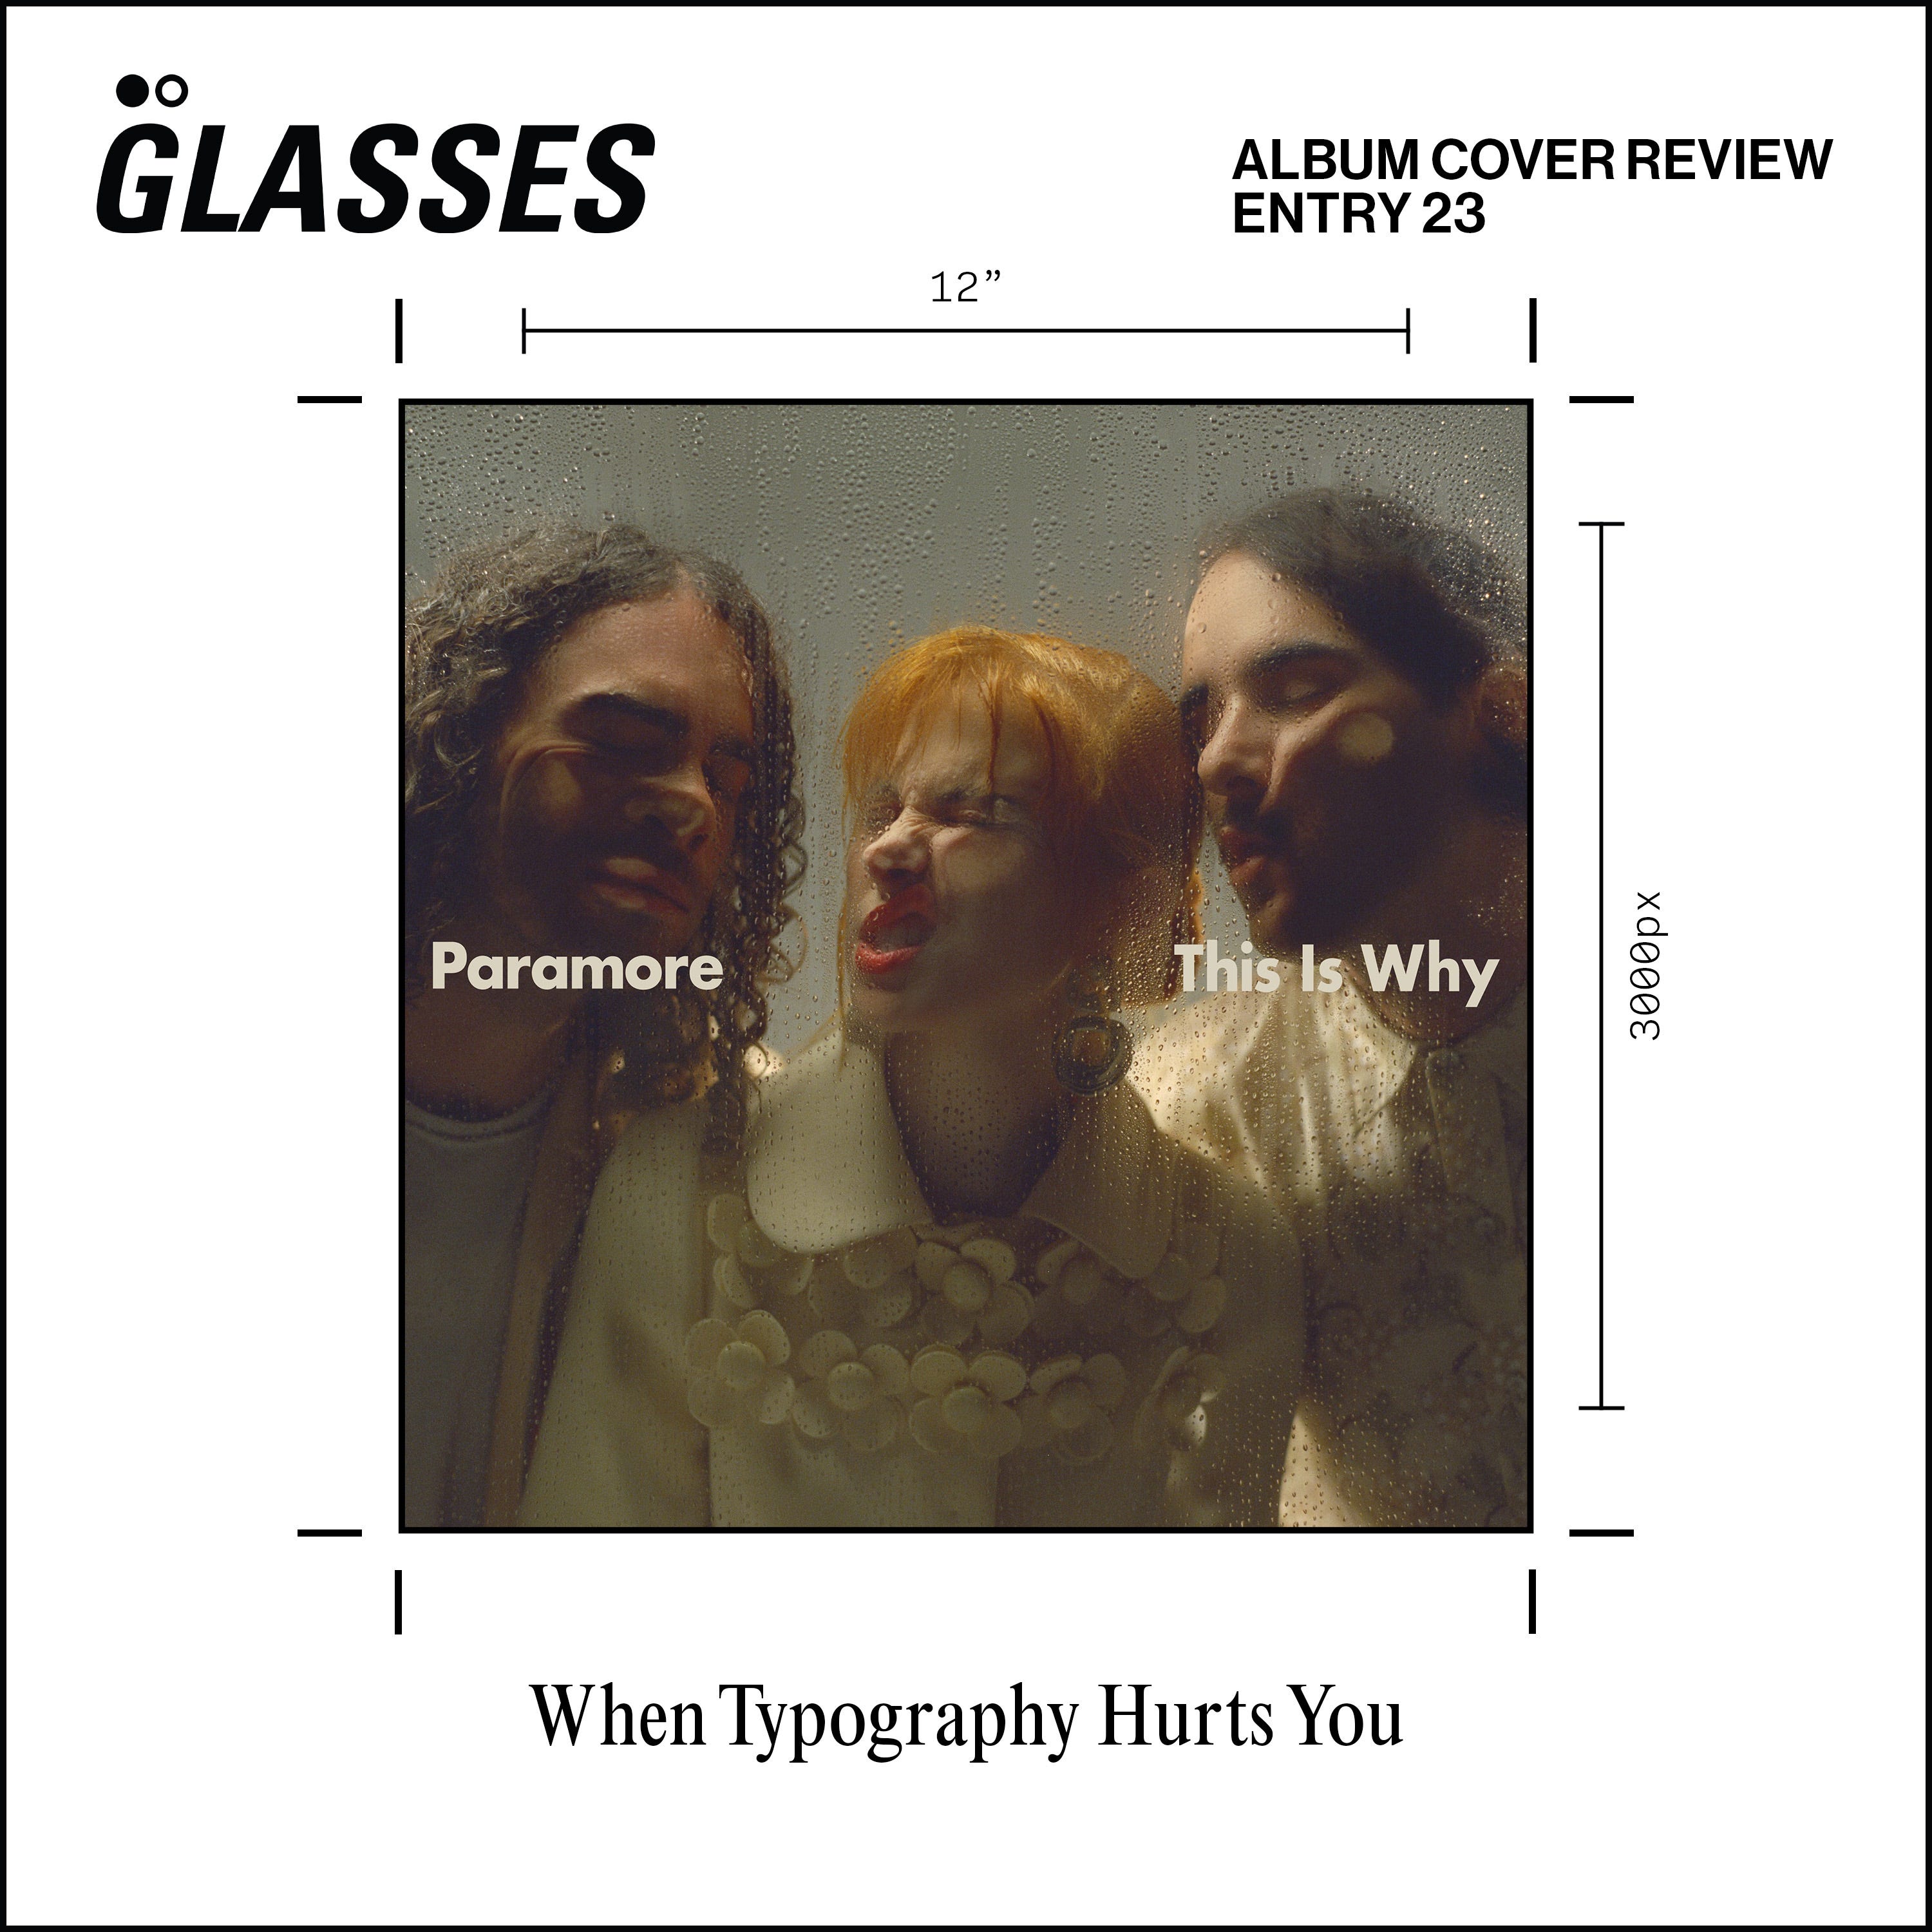 Paramore - This Is Why  ALBUM COVER REVIEW: When Typography Hurts You